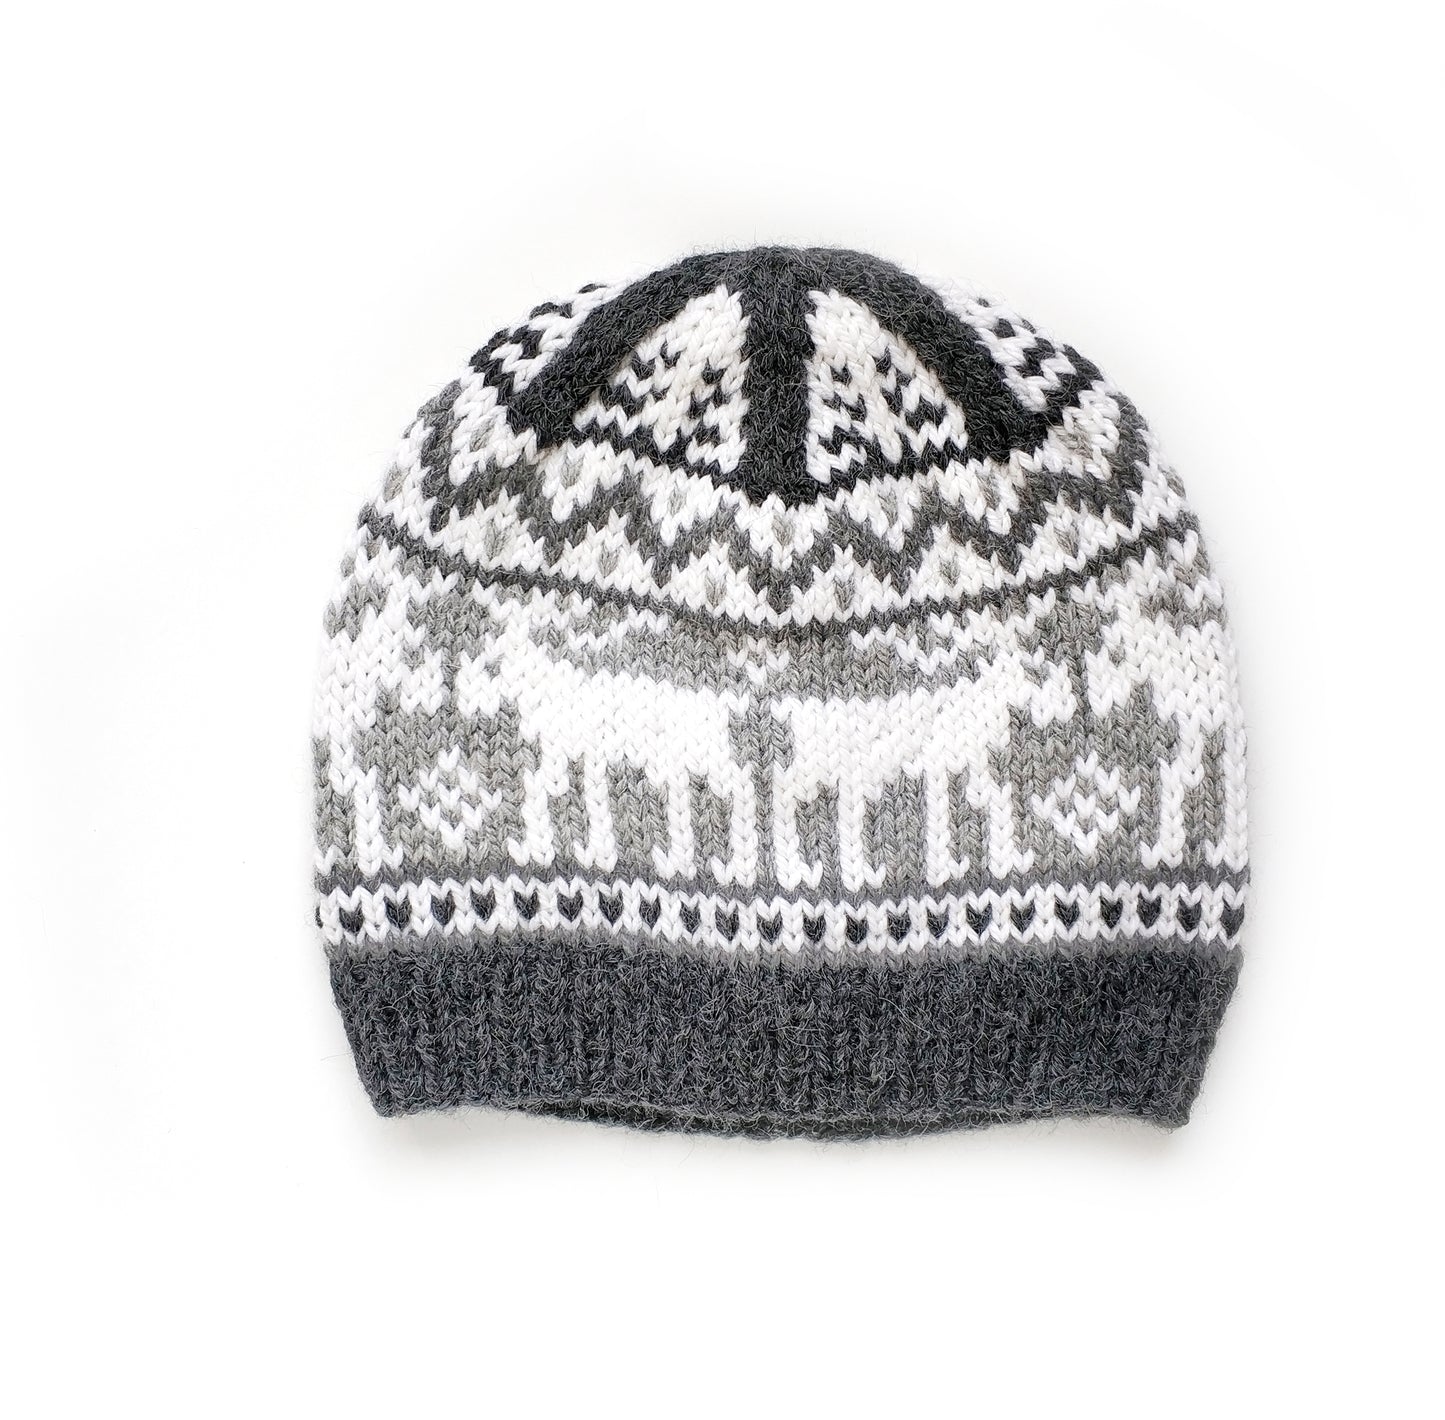 gray and white wool hand-knitted Fair Isle beanie hat in Moose knitting pattern